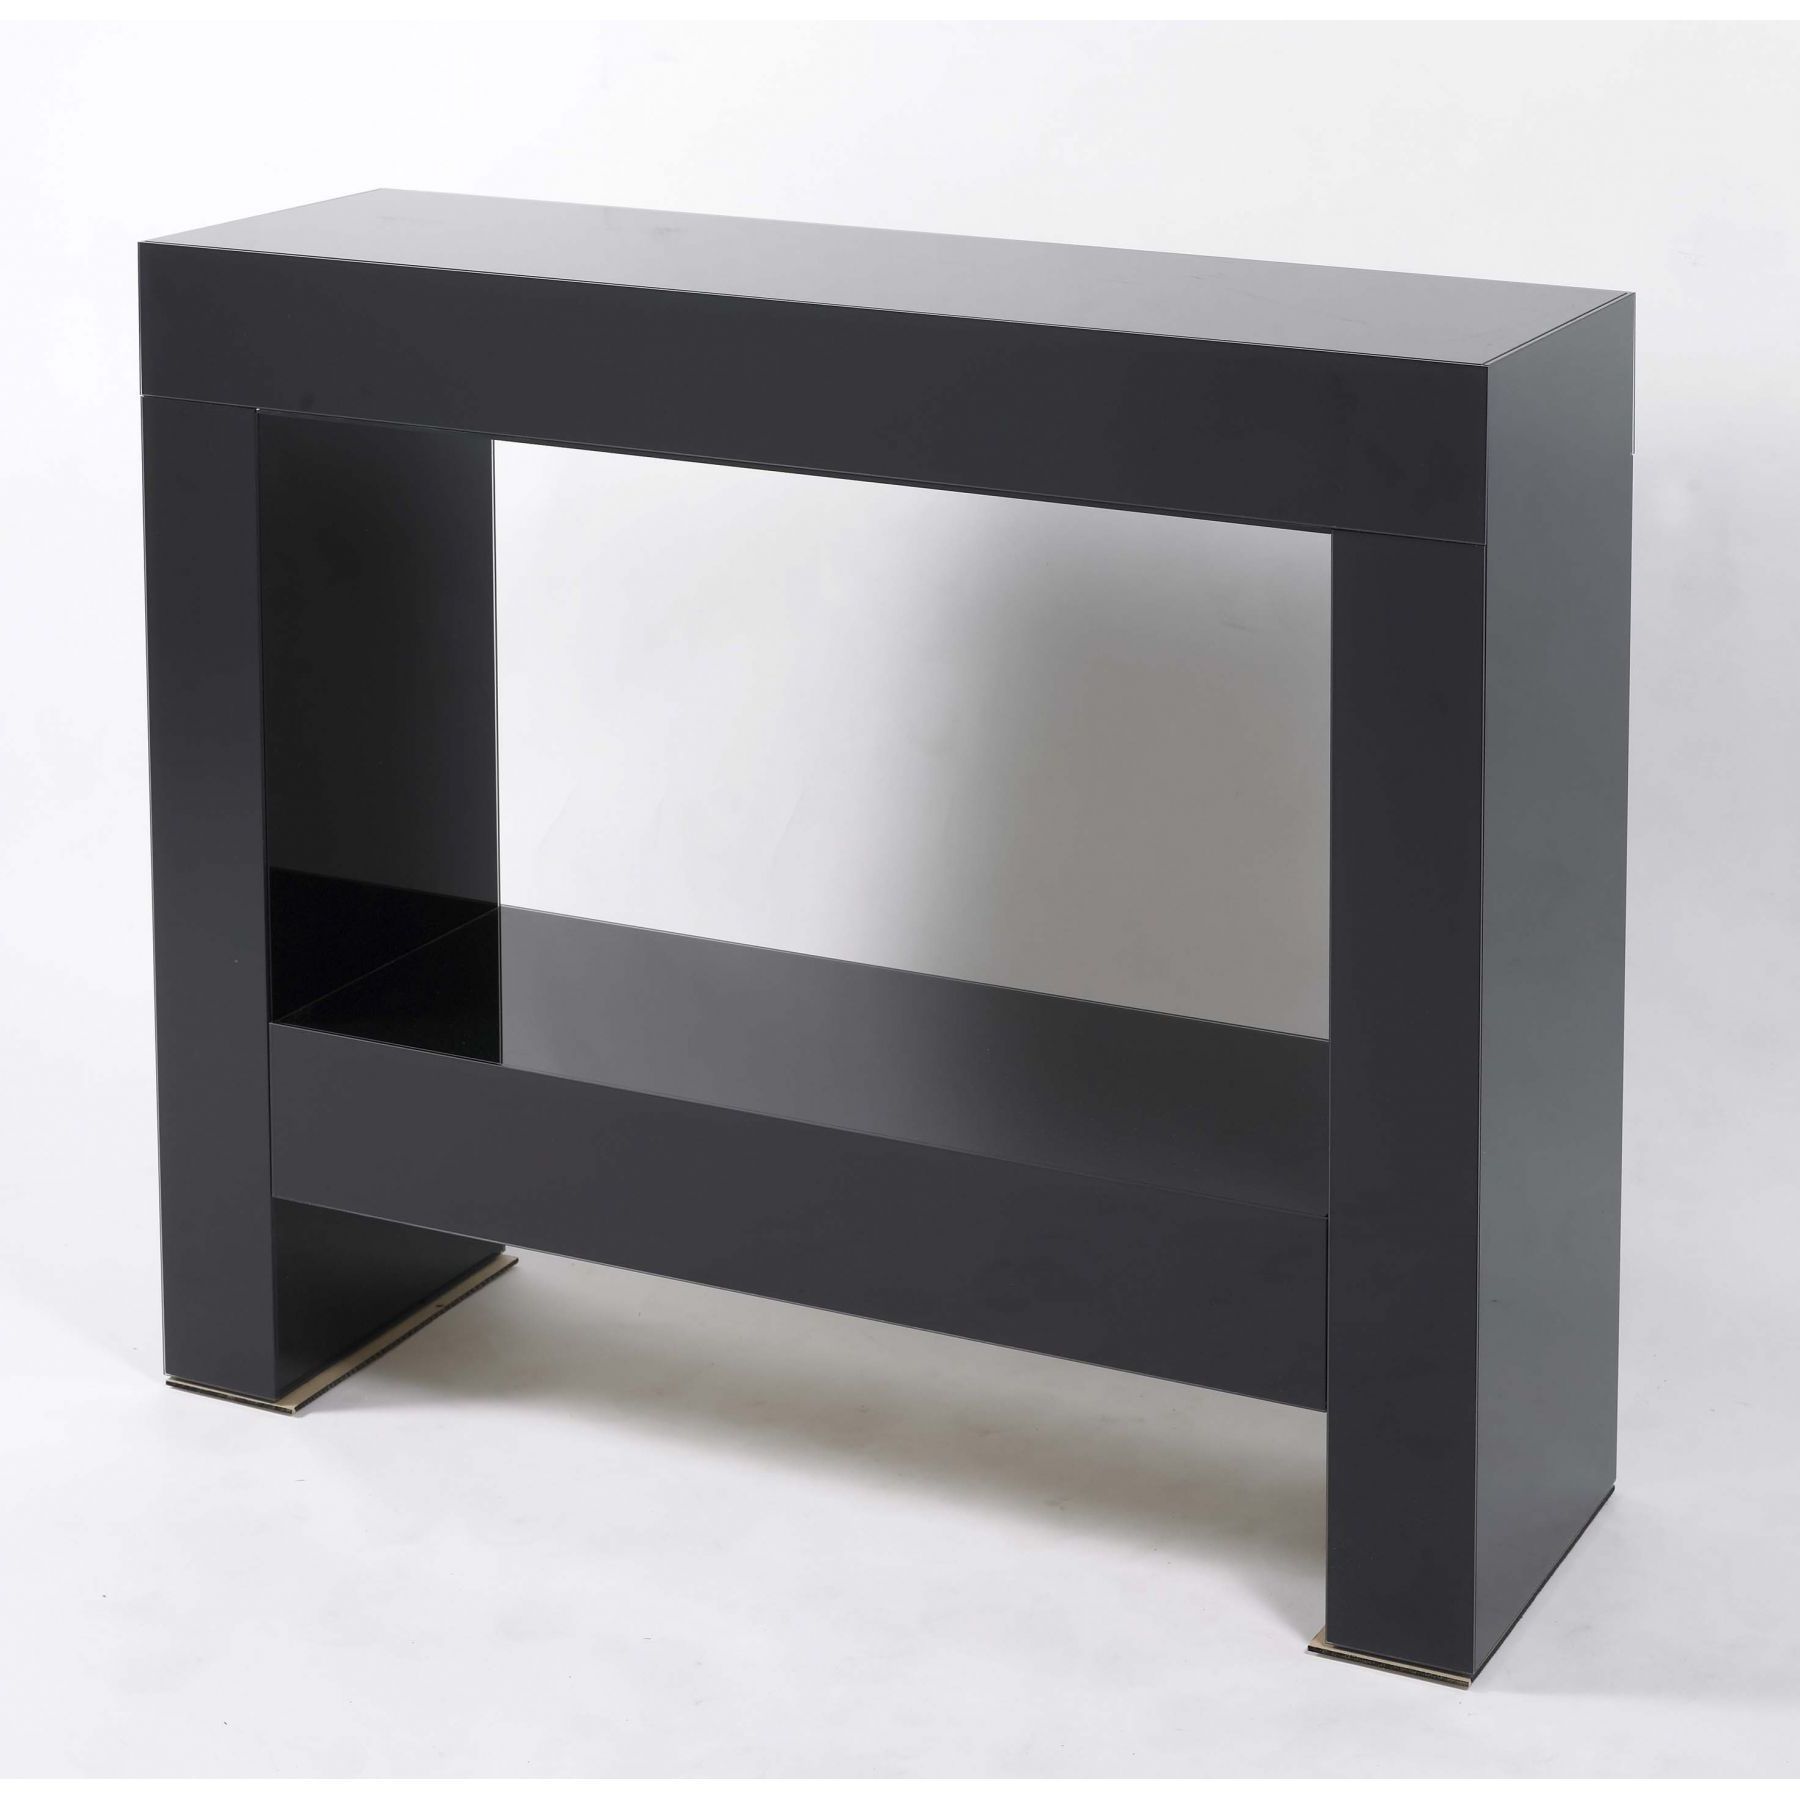 Contemporary Black Parsons Console Table With Glossy Finish Pertaining To Parsons Clear Glass Top &amp; Dark Steel Base 48x16 Console Tables (View 4 of 20)